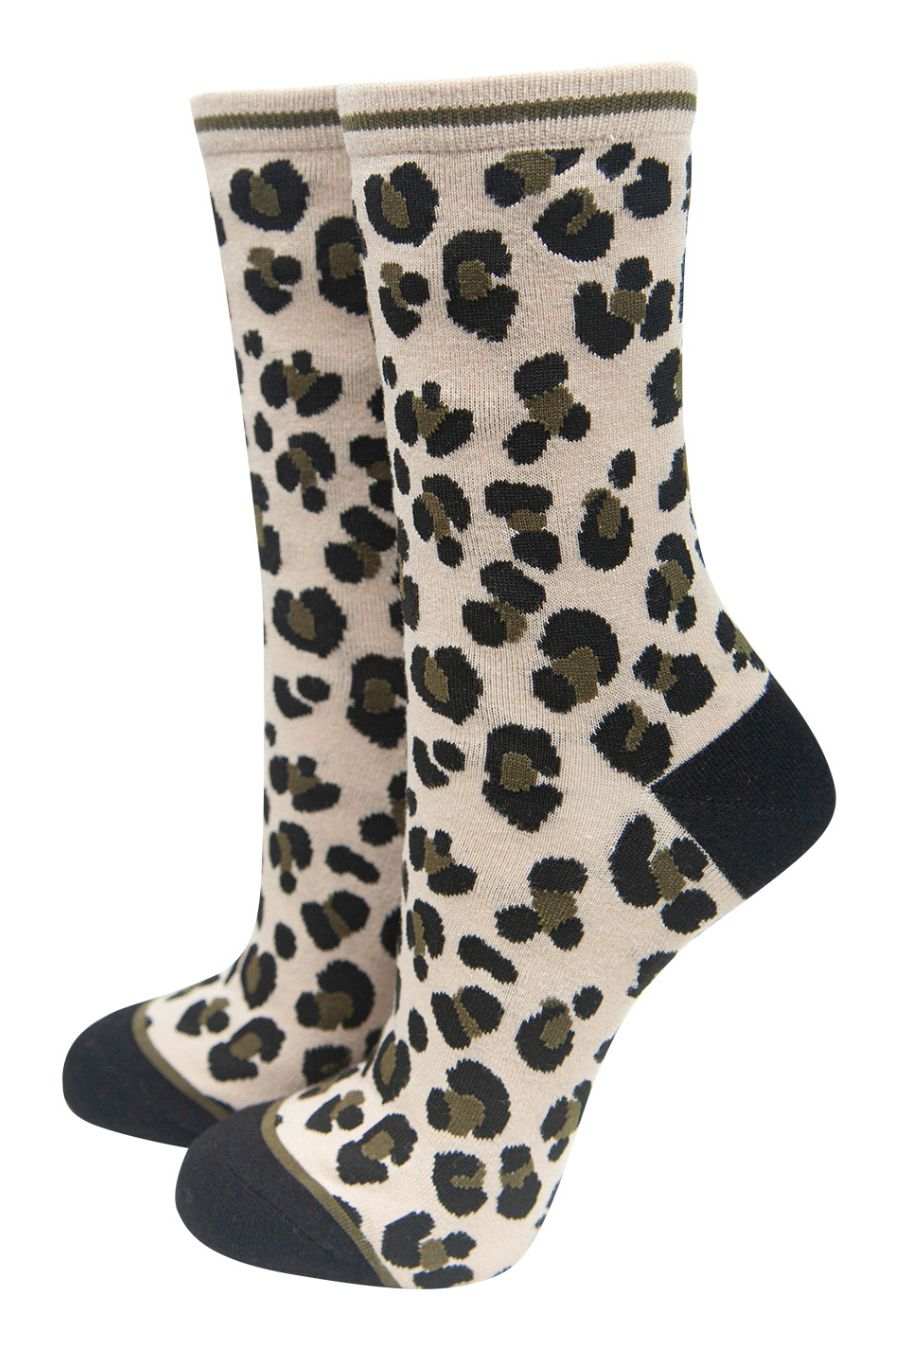 cream ankle socks with an all over beige and brown cheetah print pattern